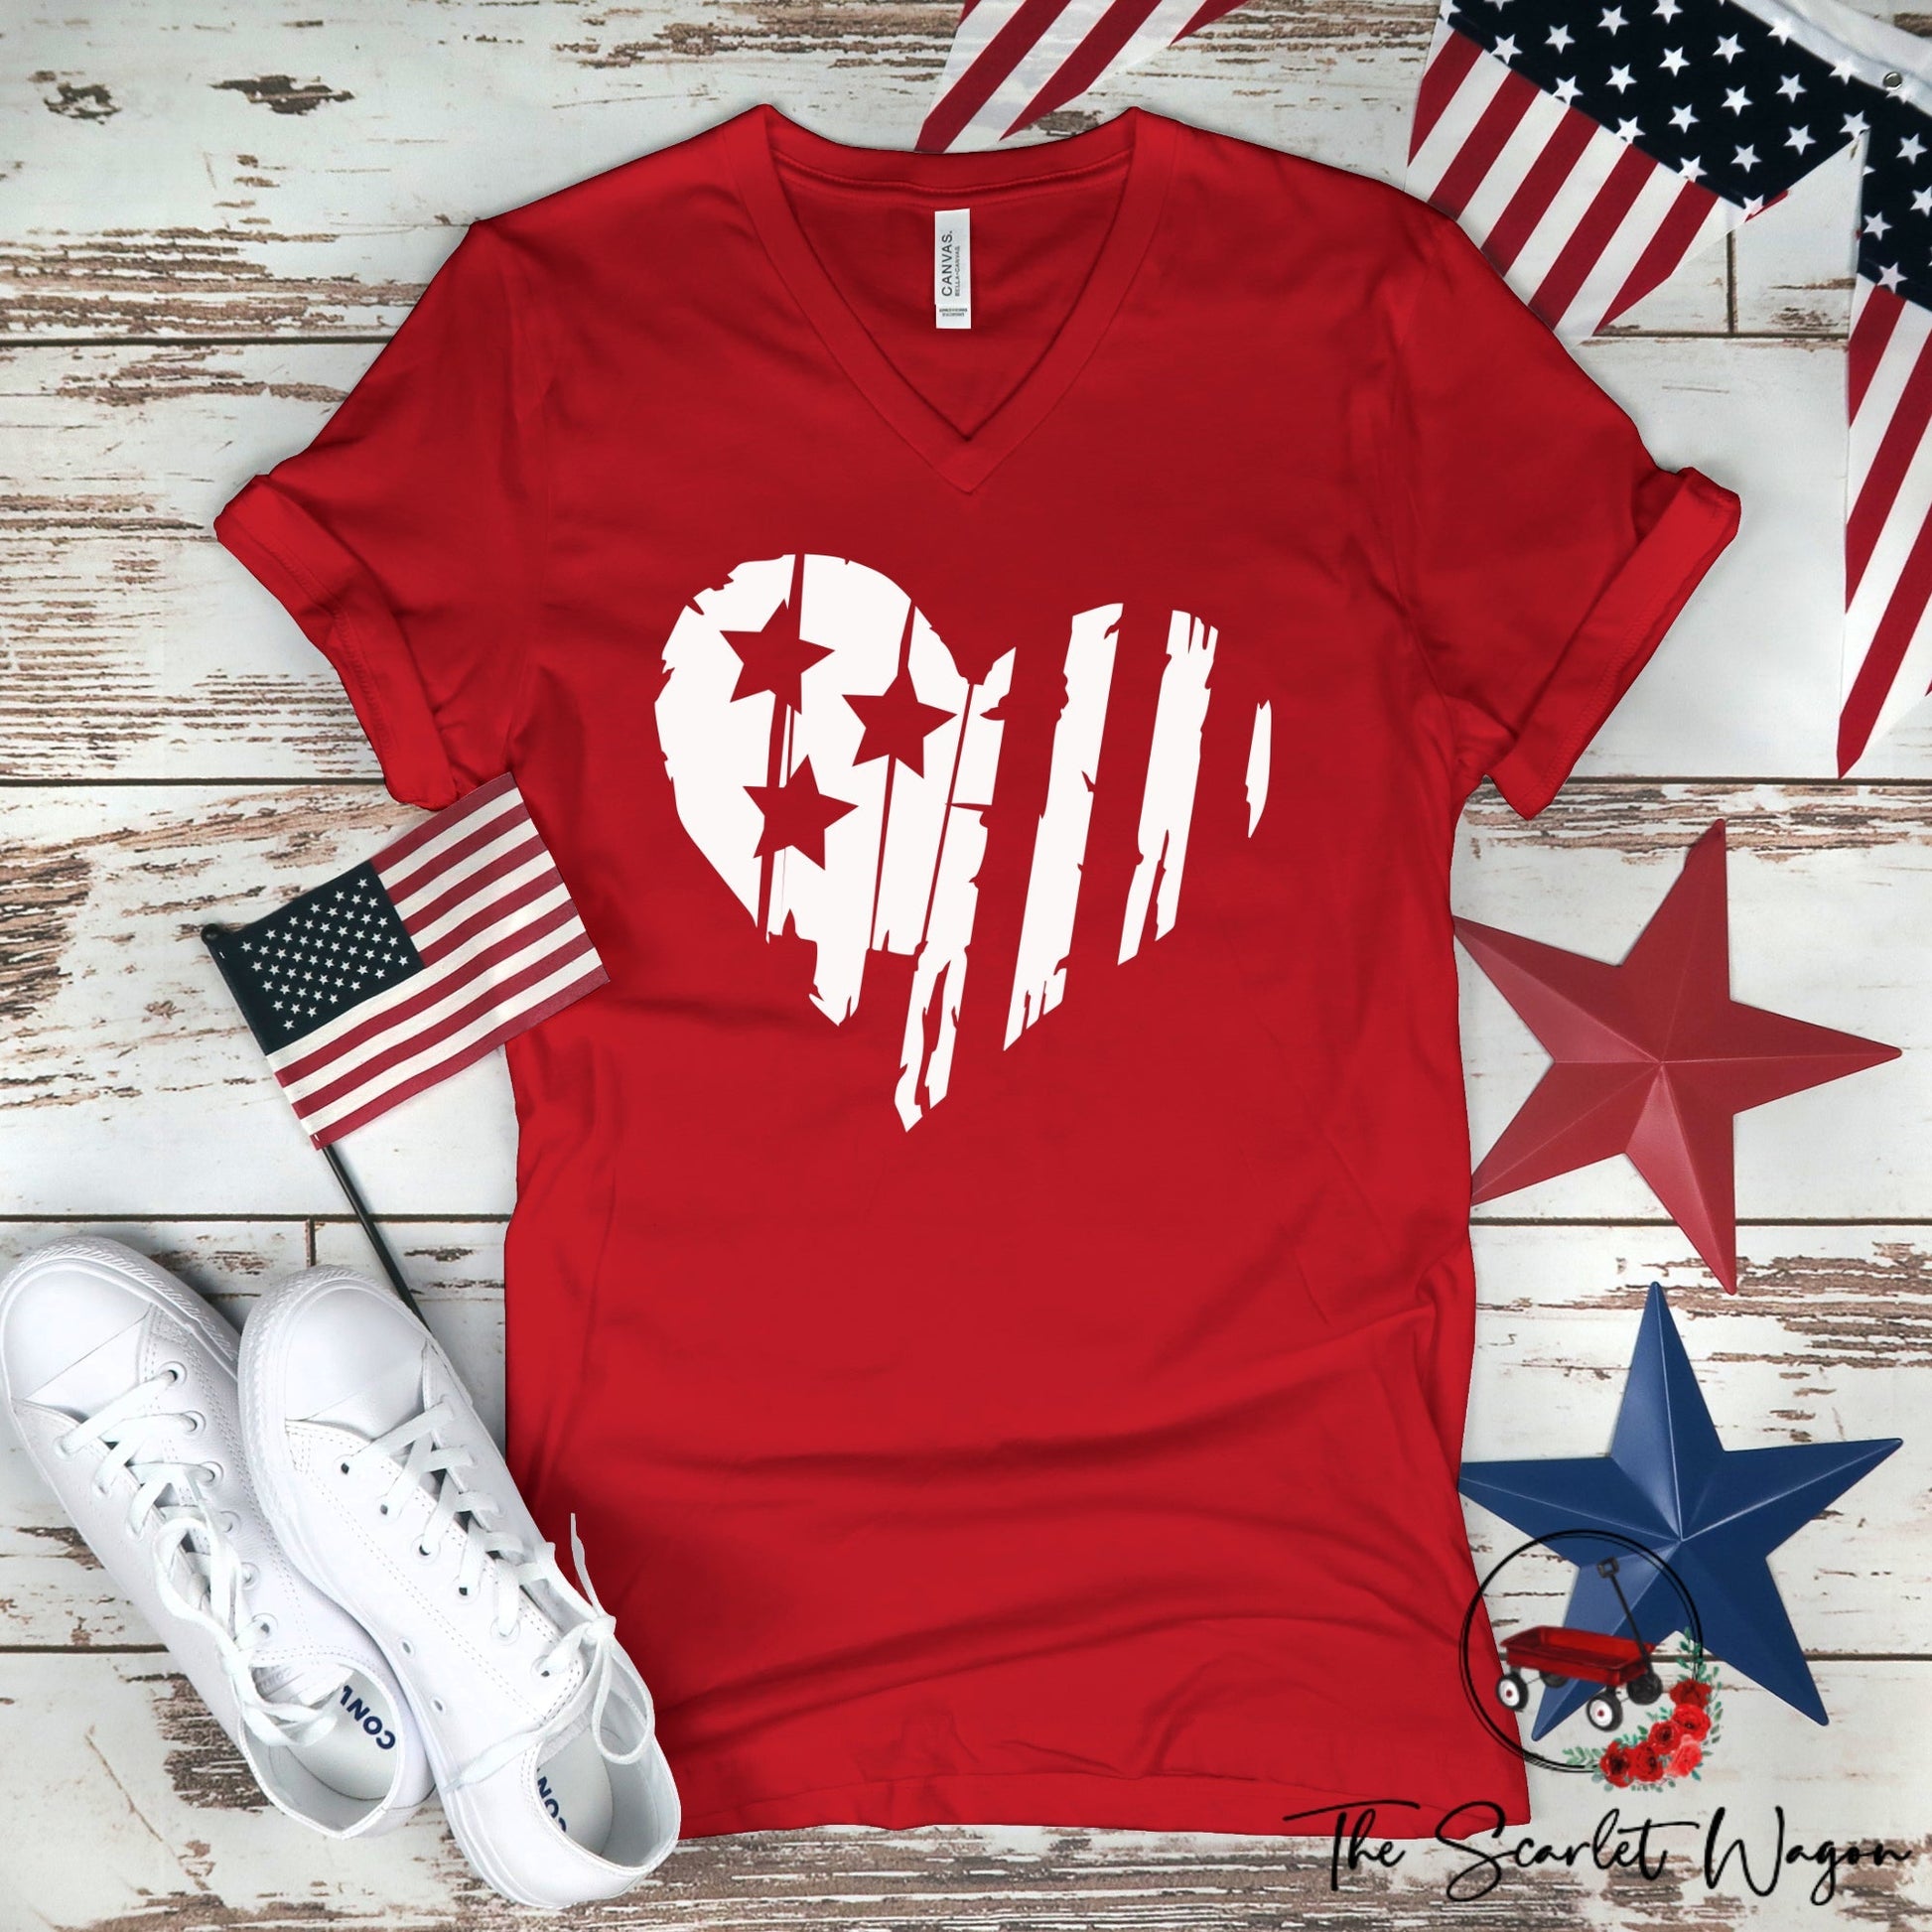 Distressed Heart-Shaped Flag Unisex V-Neck Patriotic Shirt The Scarlet Wagon Boutique Red XS 